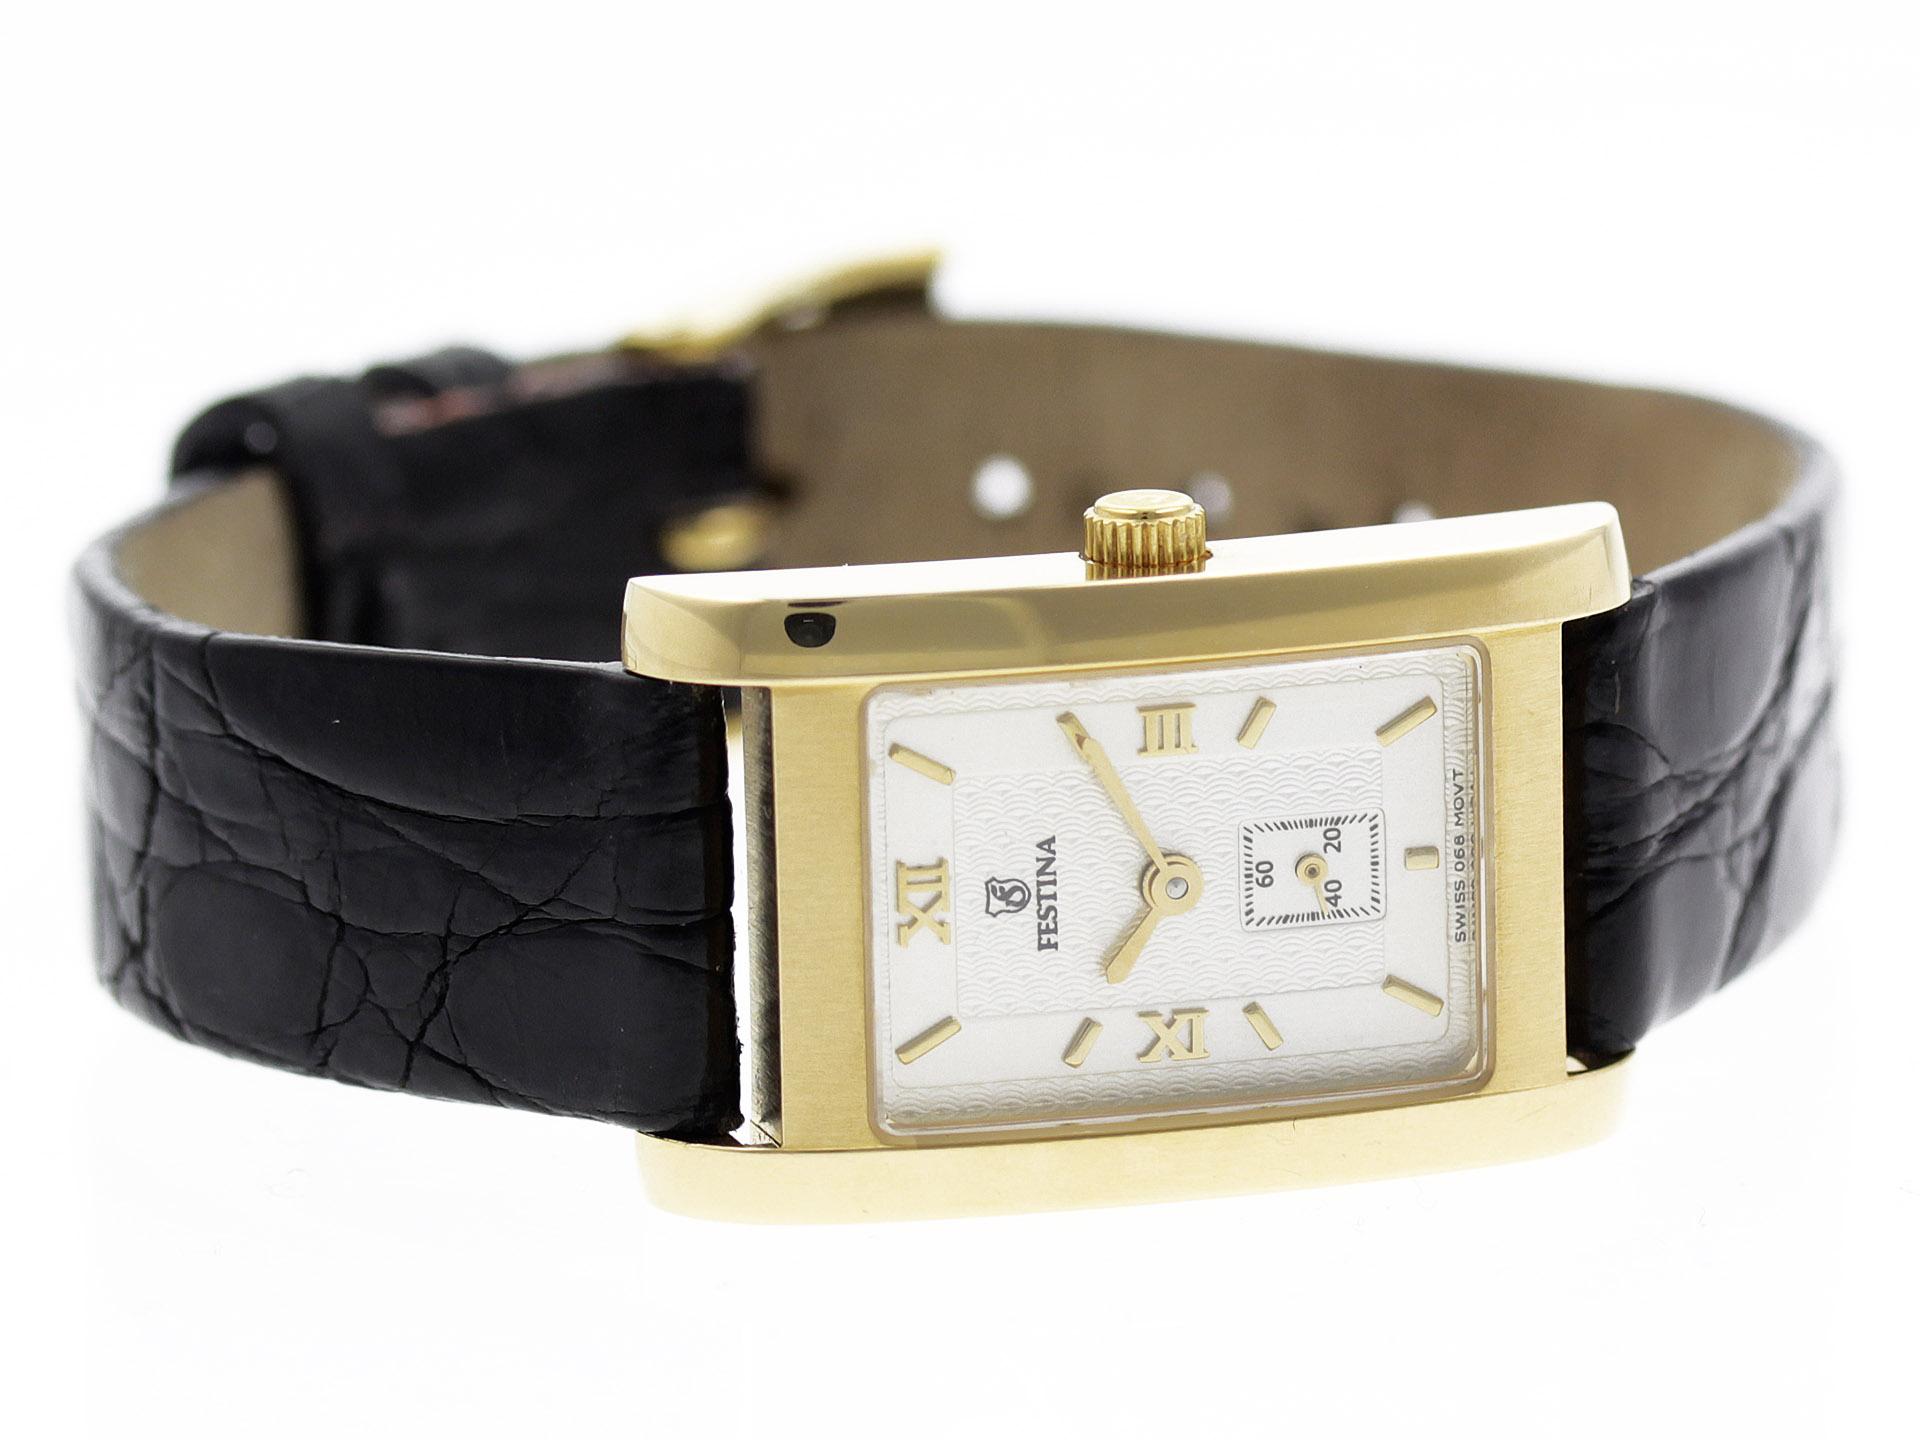 18K Yellow Gold Vintage Festina Tank watch, water resistance to 30m, with black leather strap.

Watch	
Brand:	Festina
Series:	Tank
Model #:	N/A
Gender:	Ladies’
Condition:	Excellent Condition Gently Pre-owned, Light Scratches on Case, Original Strap